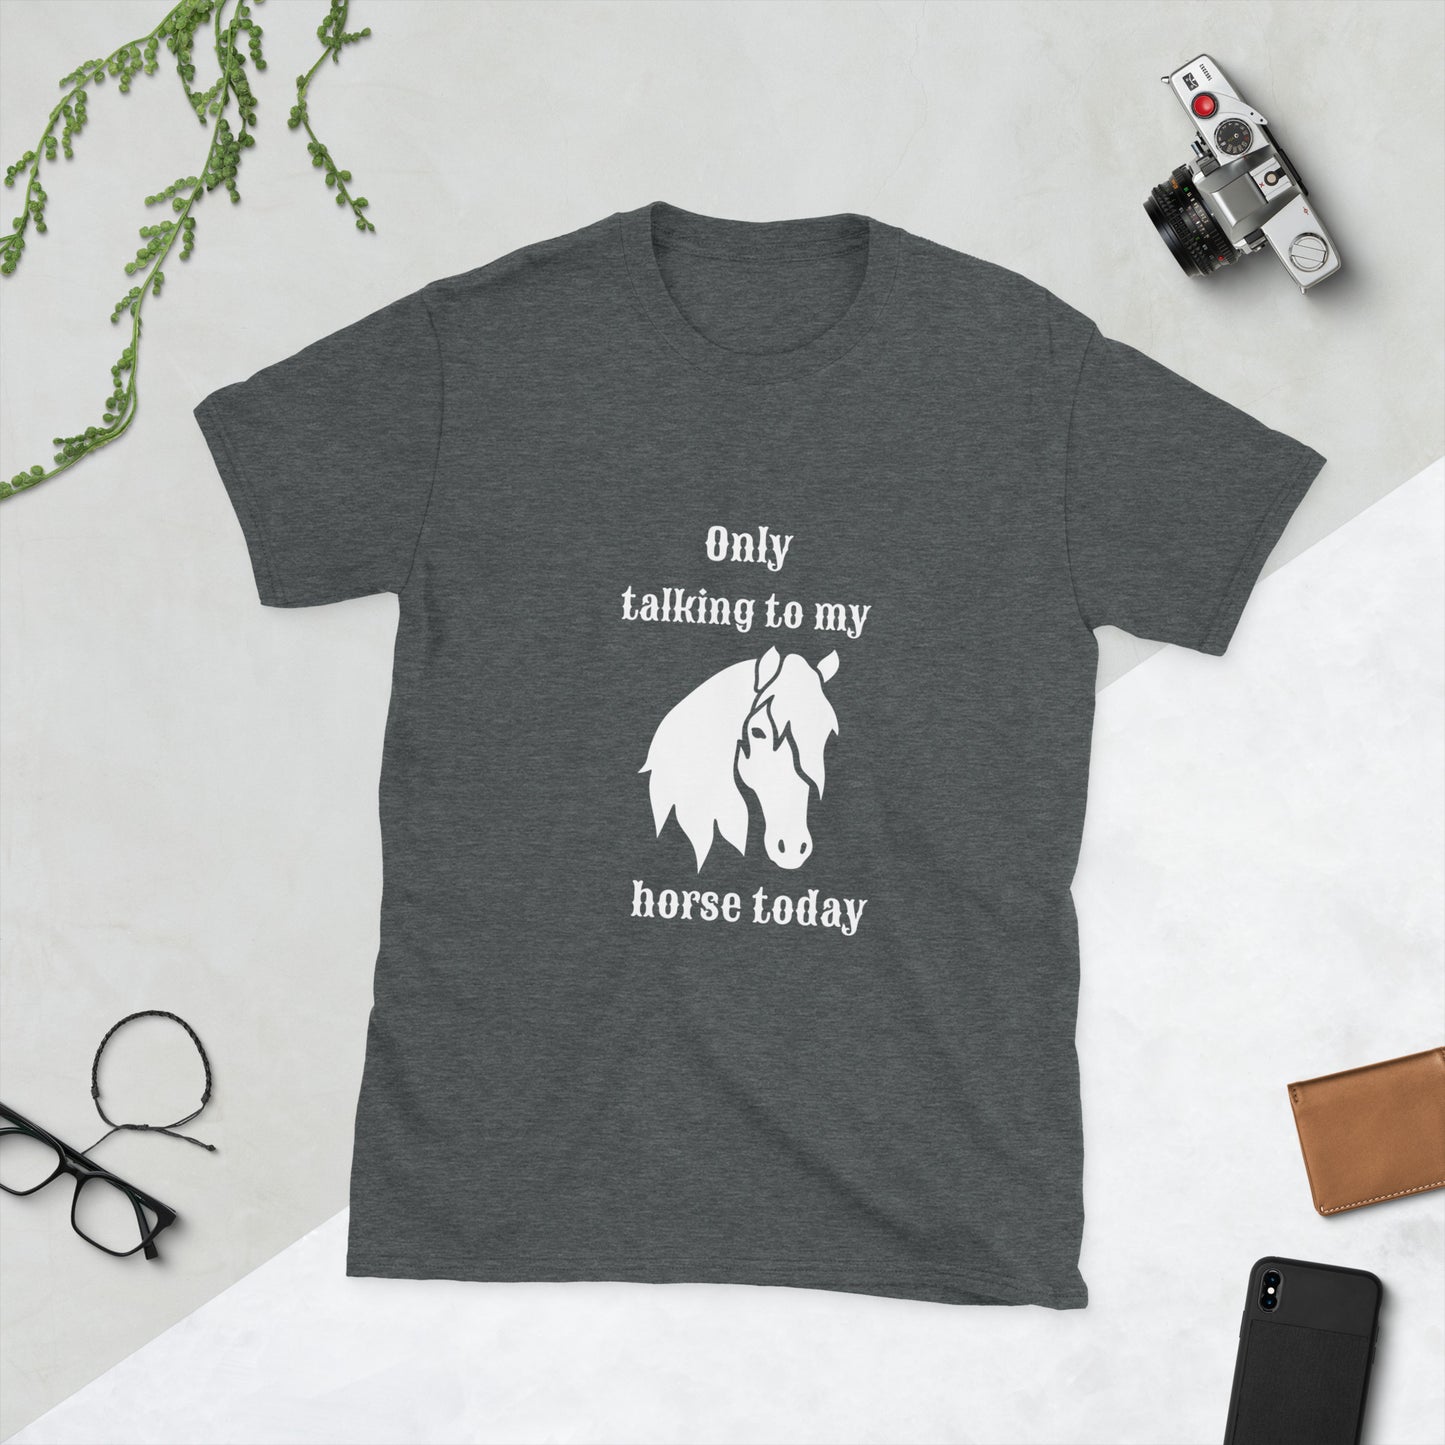 Only Talking to my Horse Today - Unisex T-shirt